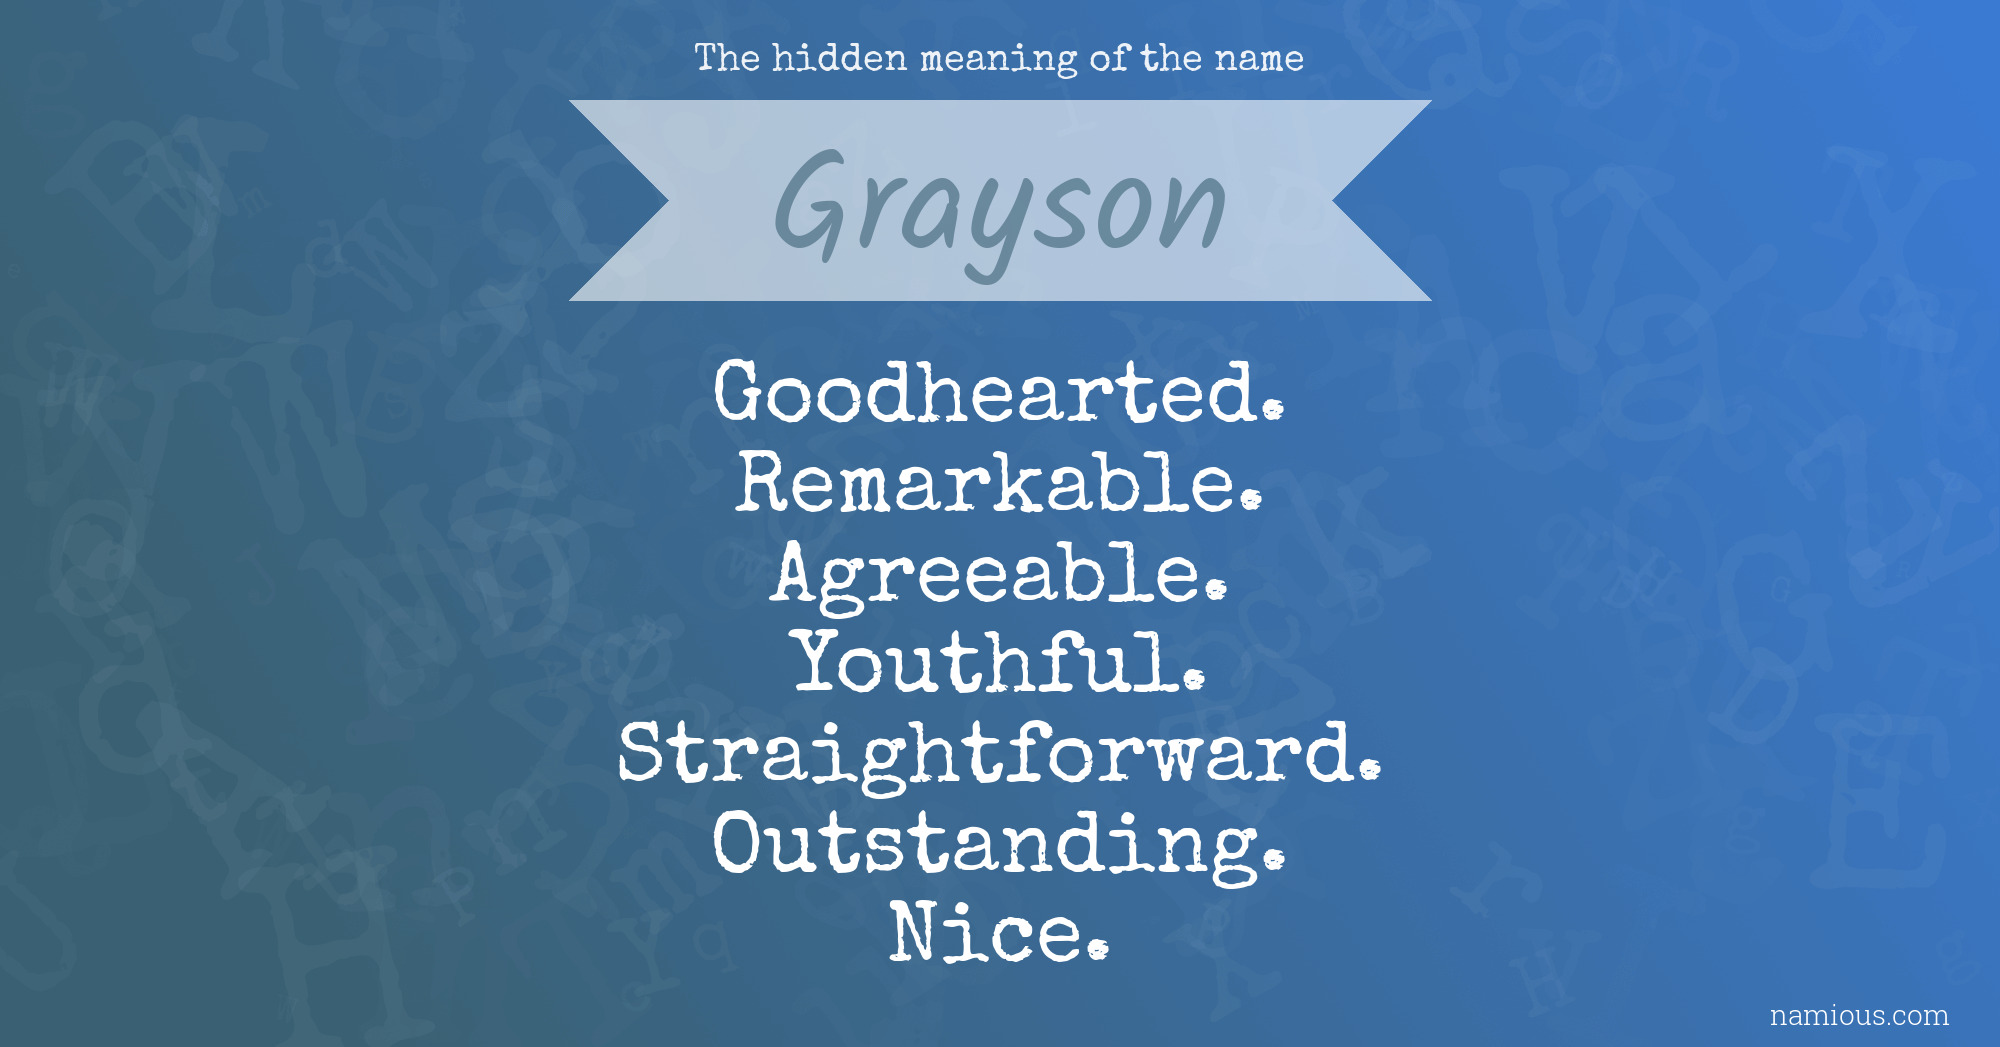 The hidden meaning of the name Grayson